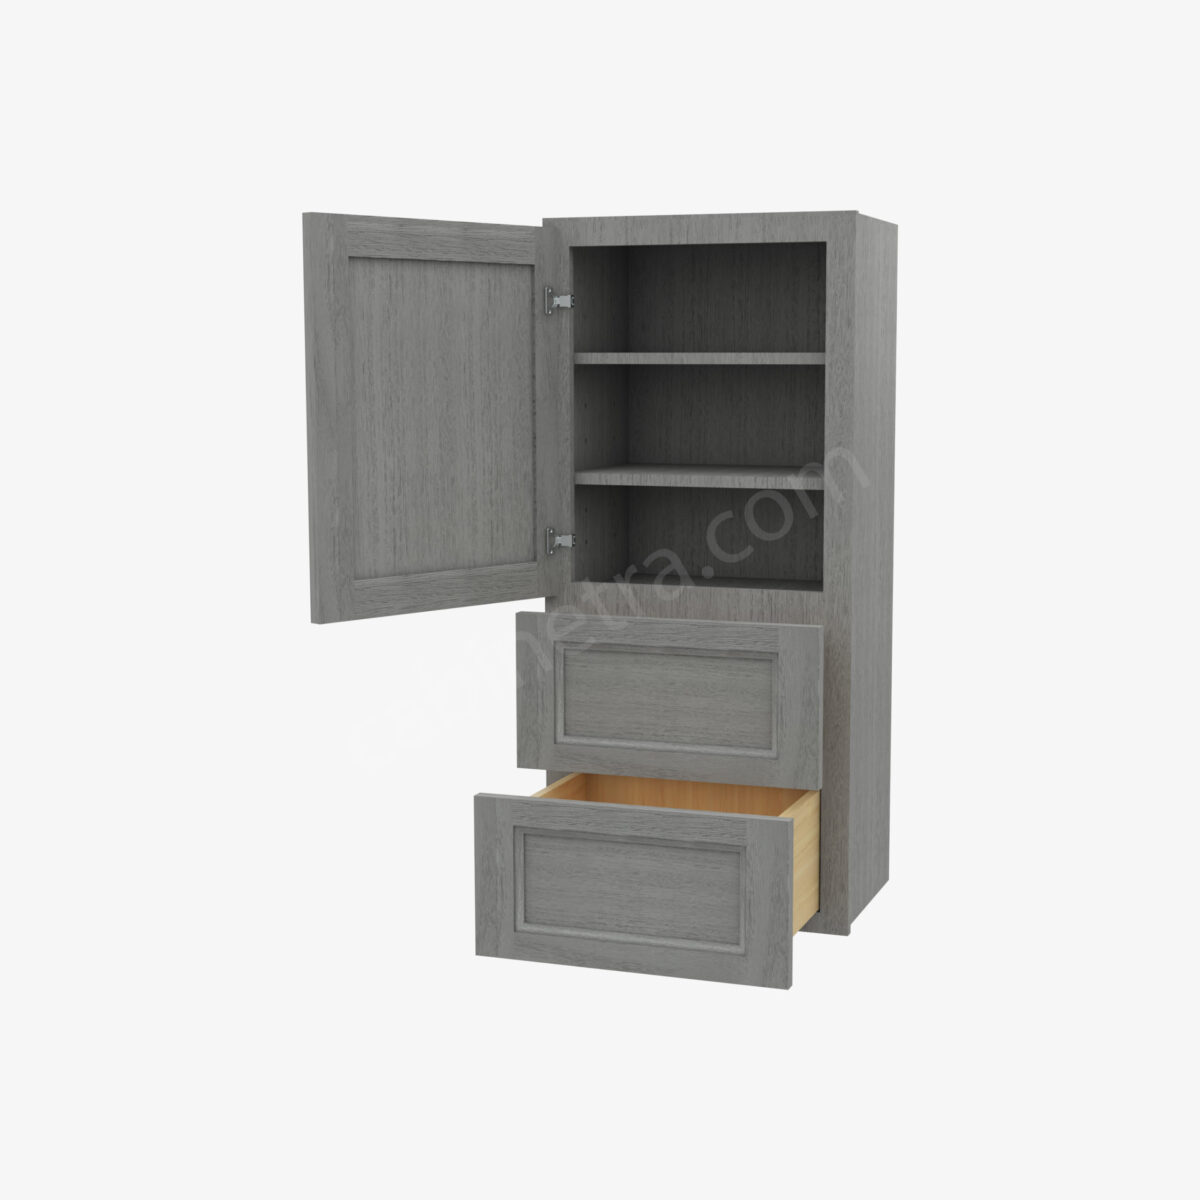 TG W2D1848 5 Forevermark Midtown Grey Cabinetra scaled